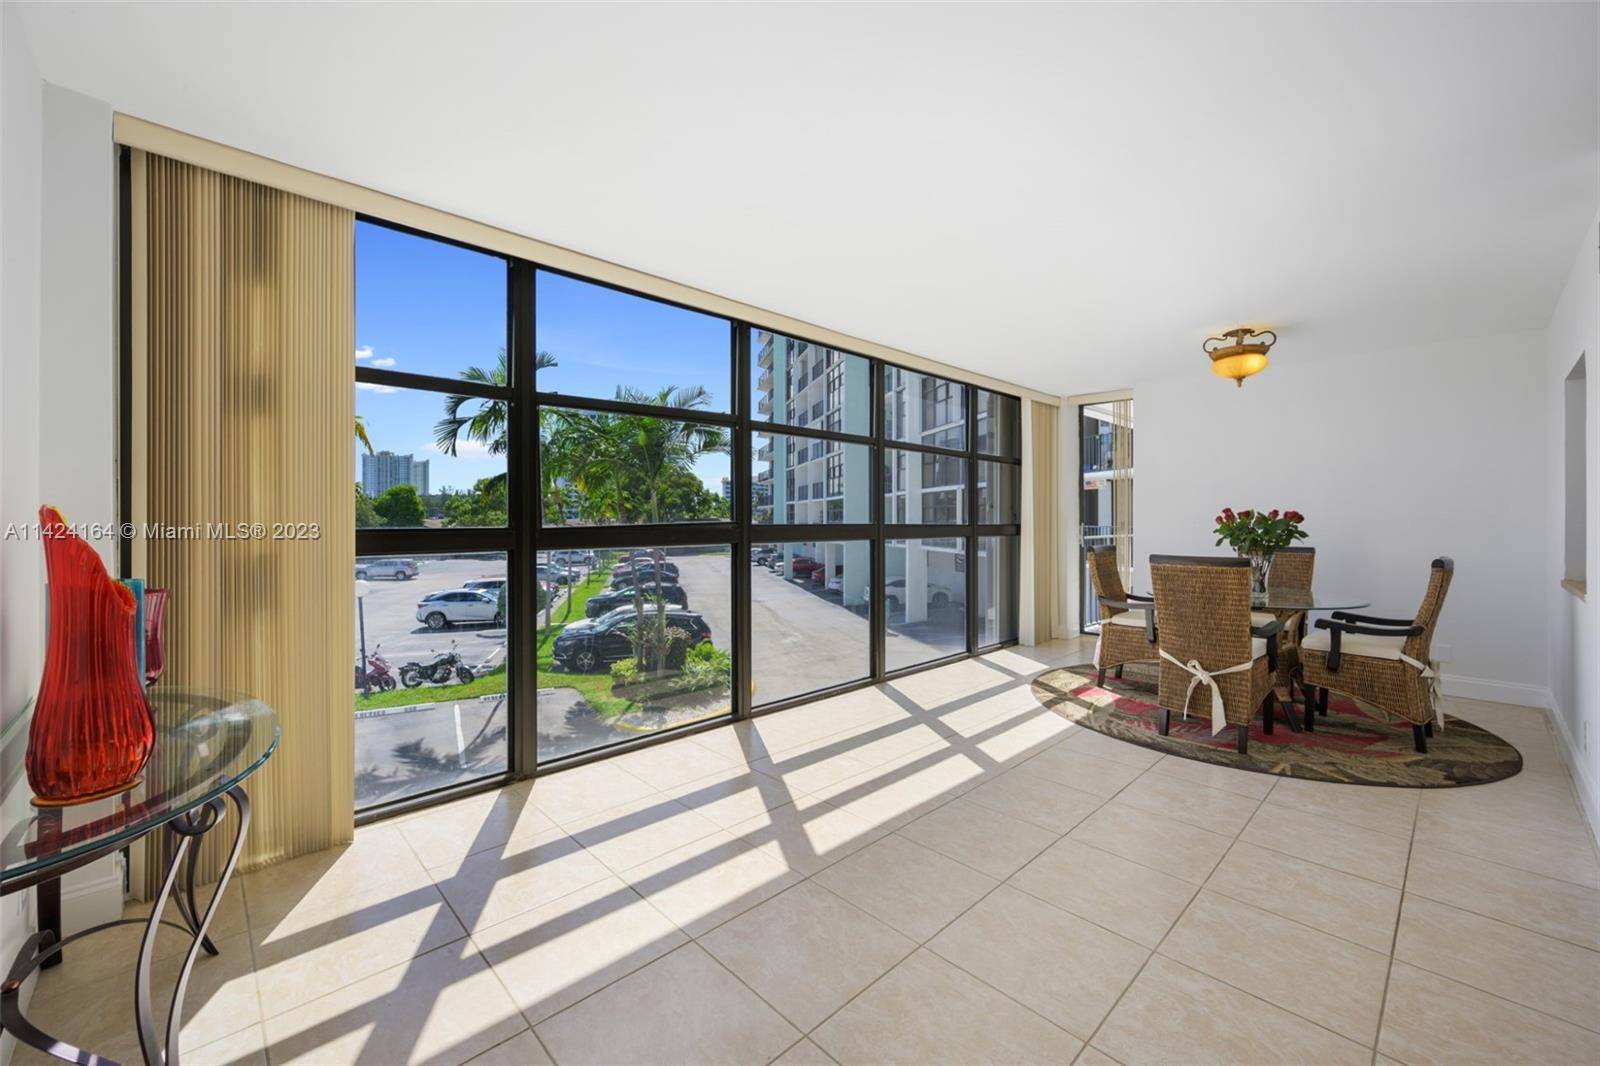 SPECTACULAR DIRECT INTRACOASTAL VIEW WITH FLOOR TO CEILING WINDOWS.